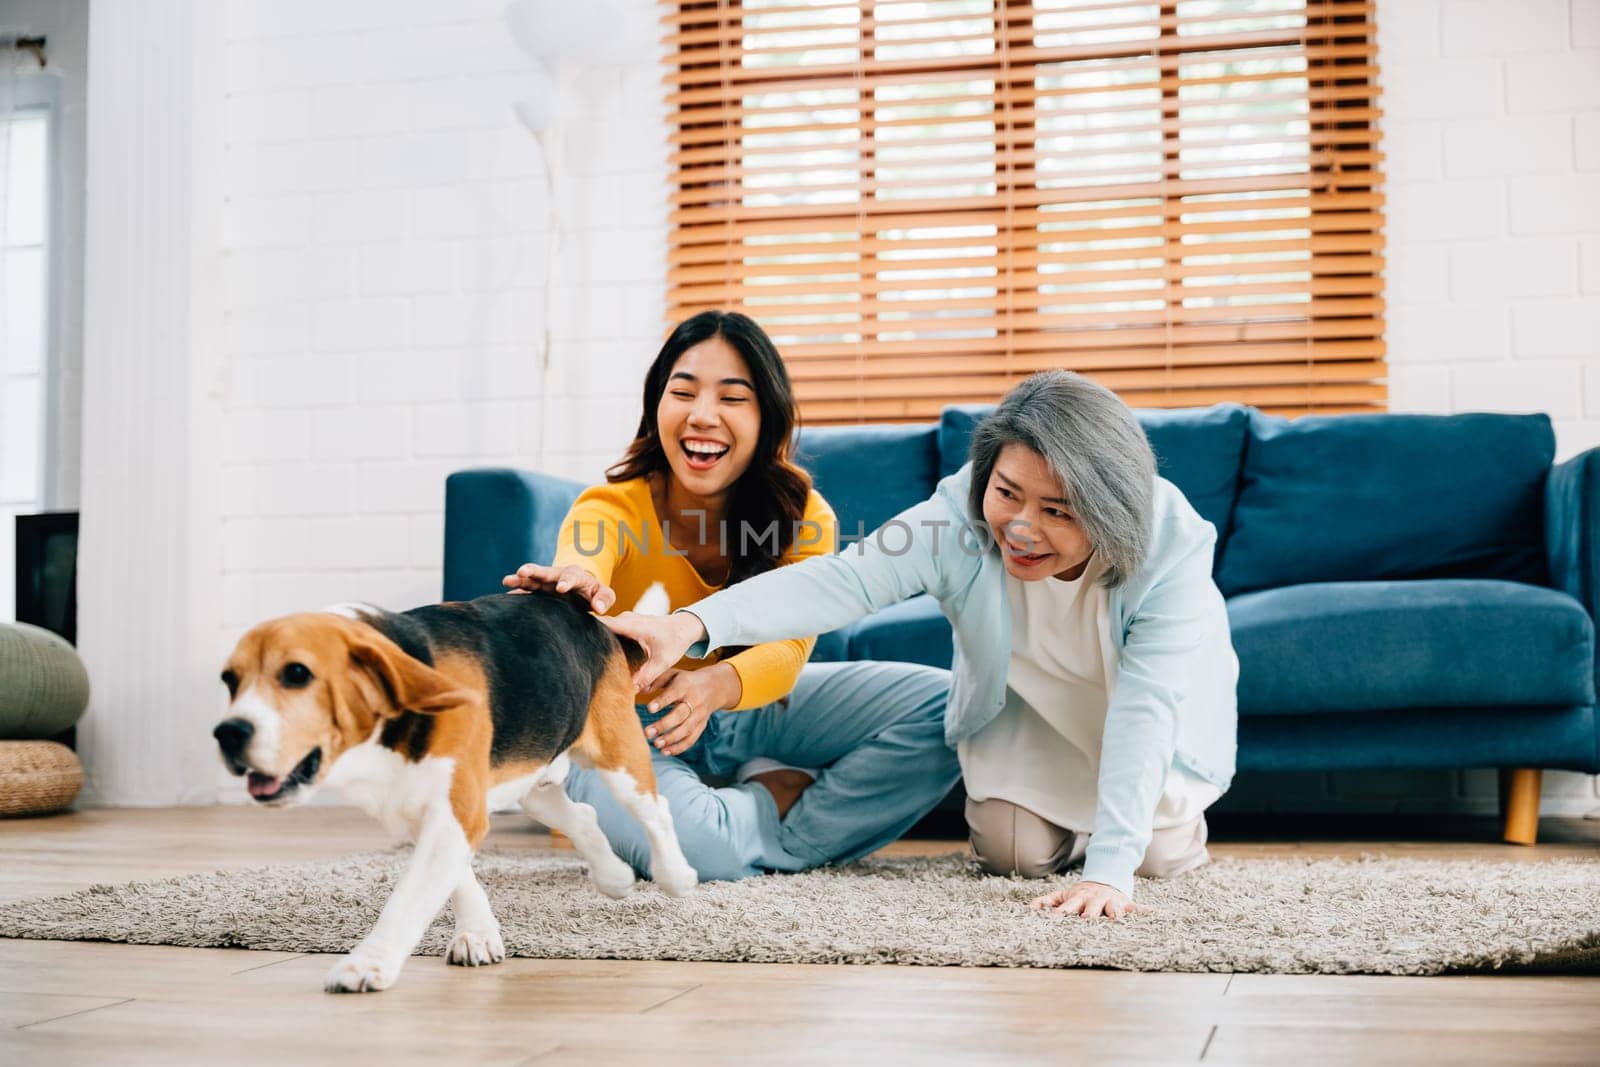 In their cozy living room, a barefoot woman and her mother run with their Beagle dog, showcasing their active and friendly lifestyle. It's a delightful scene of family togetherness. pet love